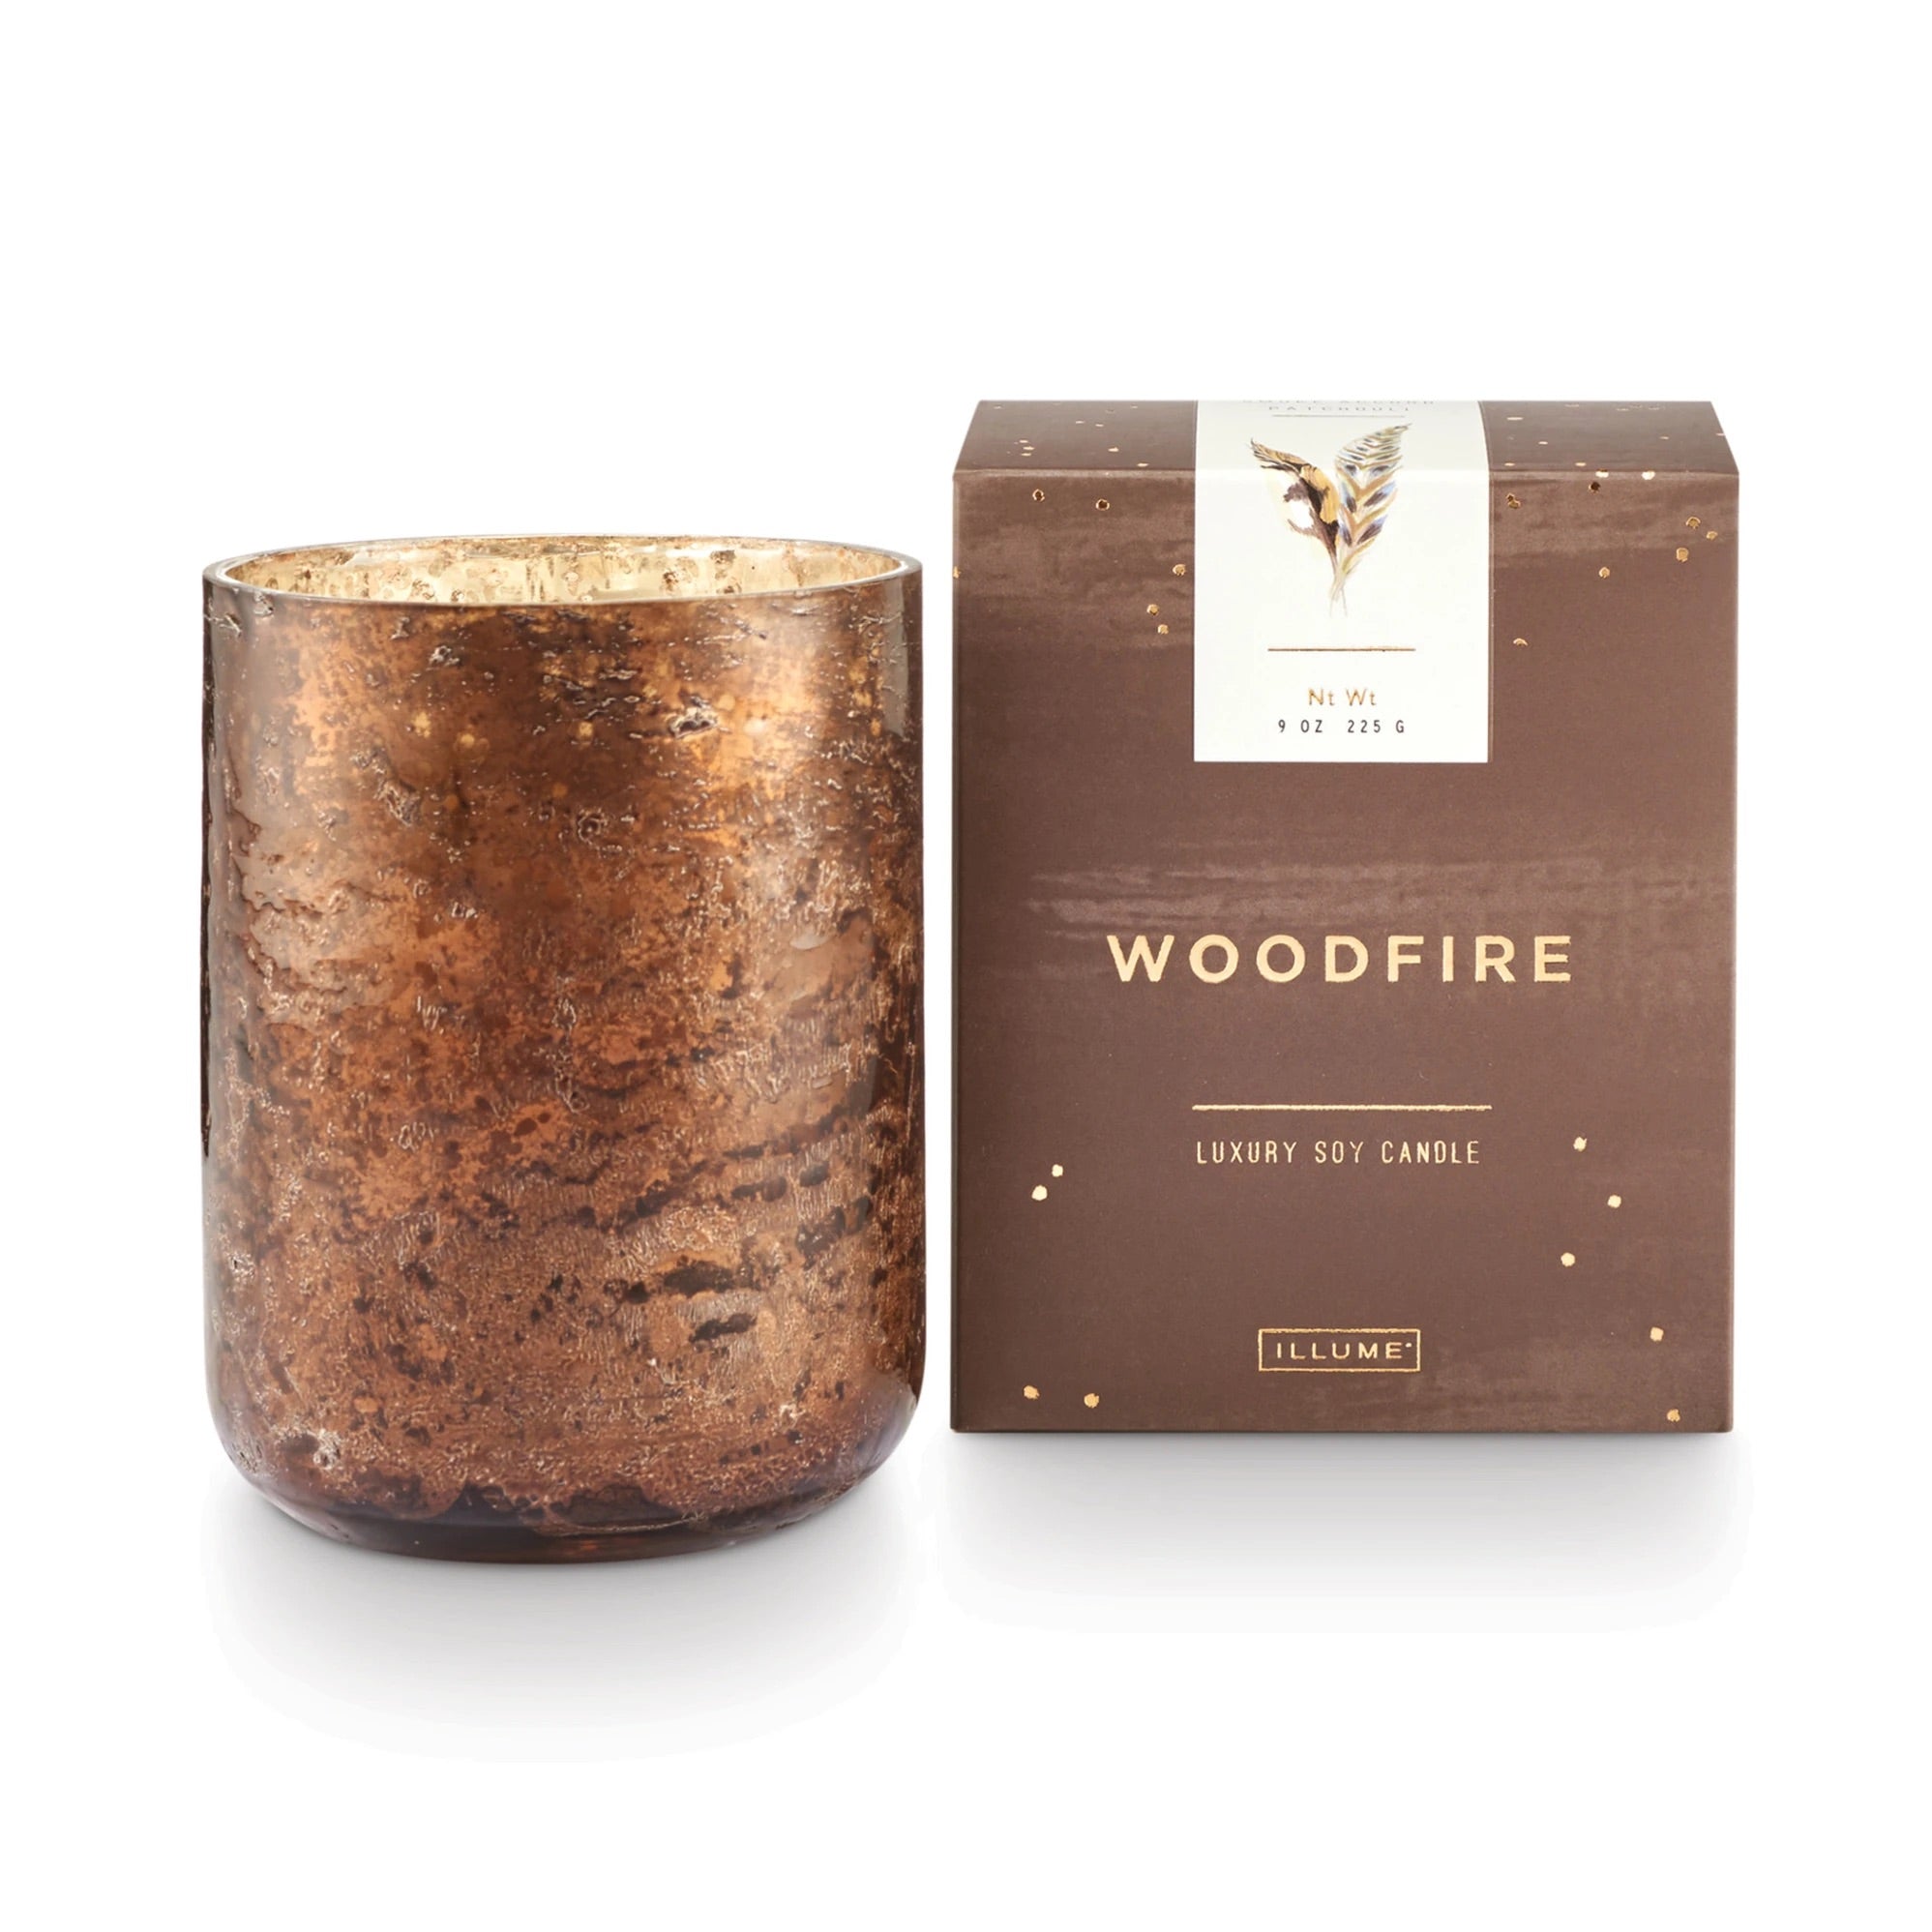 Woodfire Small Luxe Sanded Mercury Glass Candle